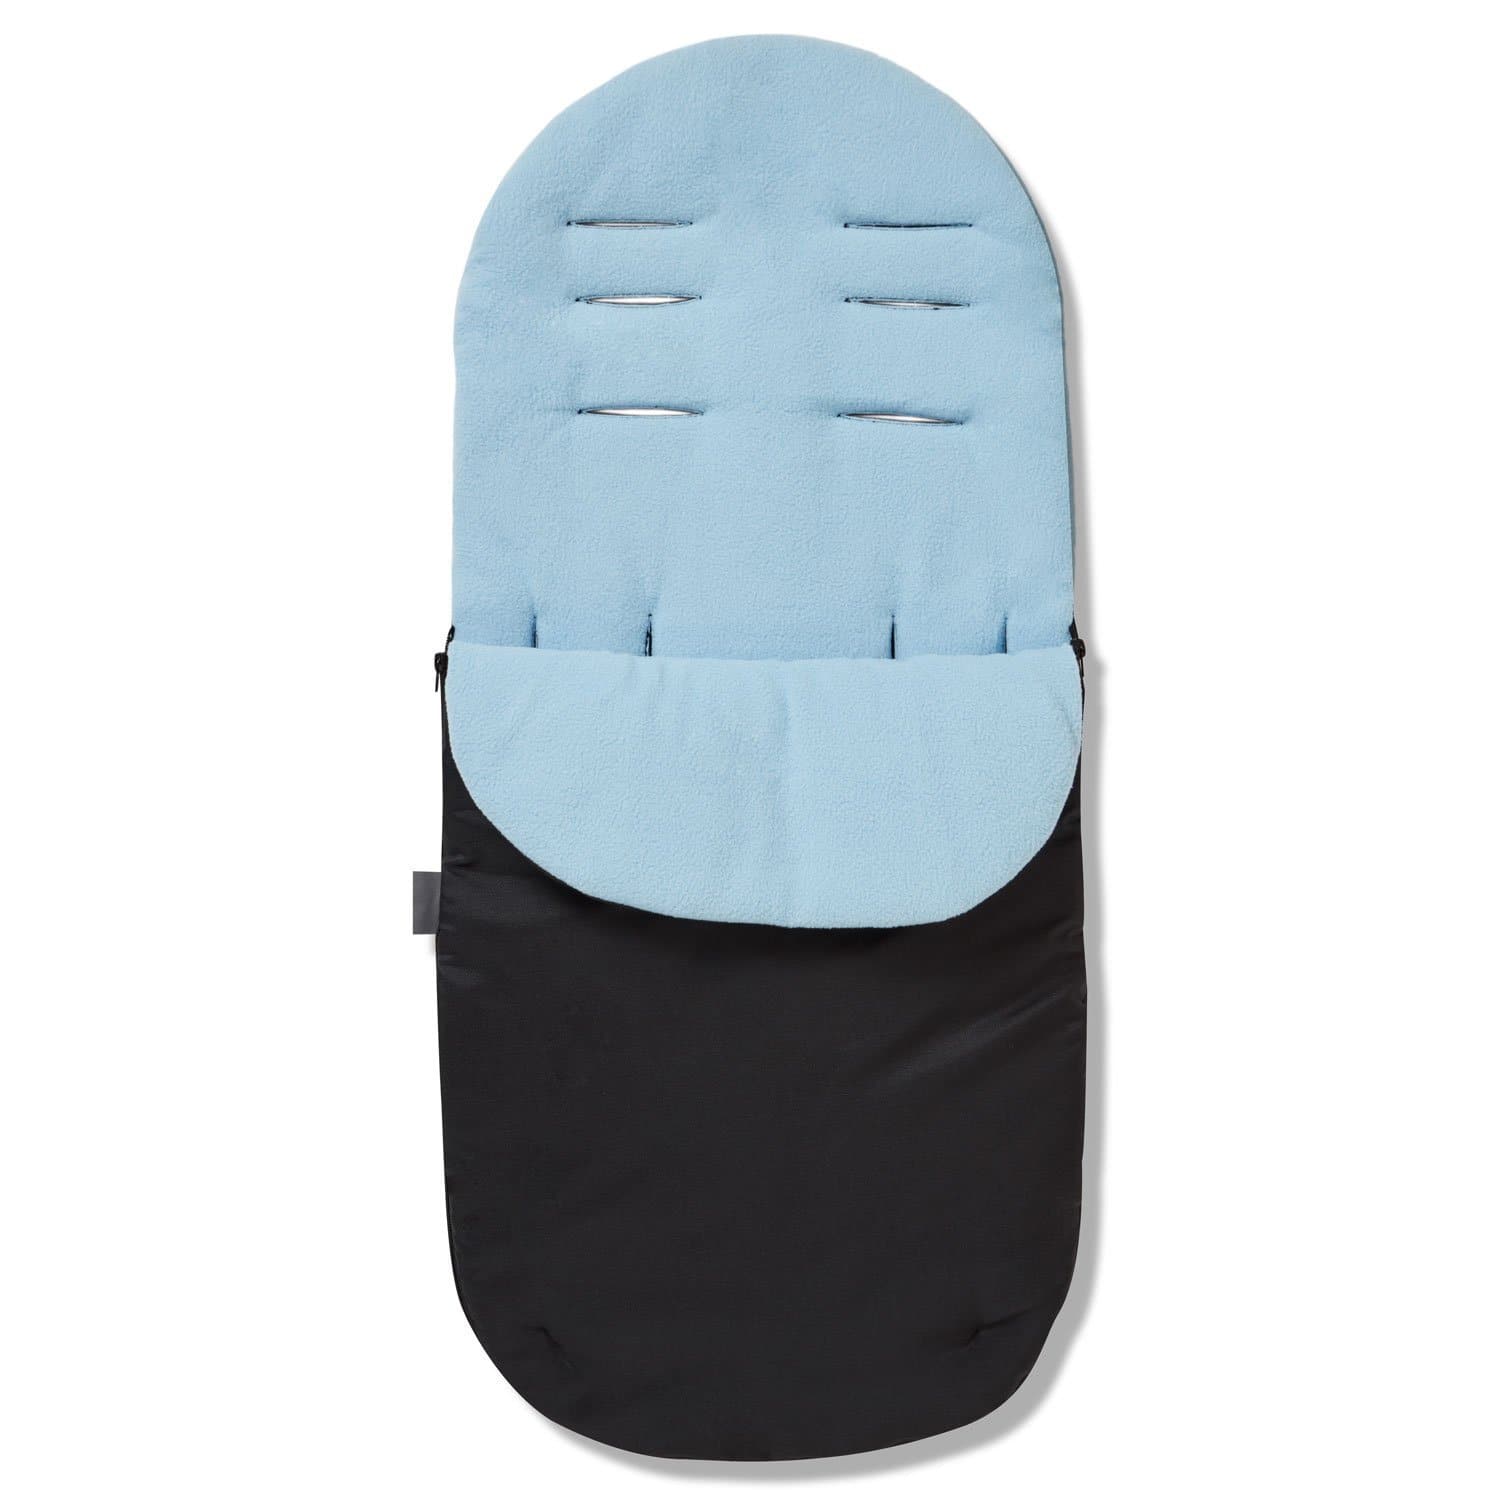 Footmuff / Cosy Toes Compatible with Cybex - Light Blue / Fits All Models | For Your Little One